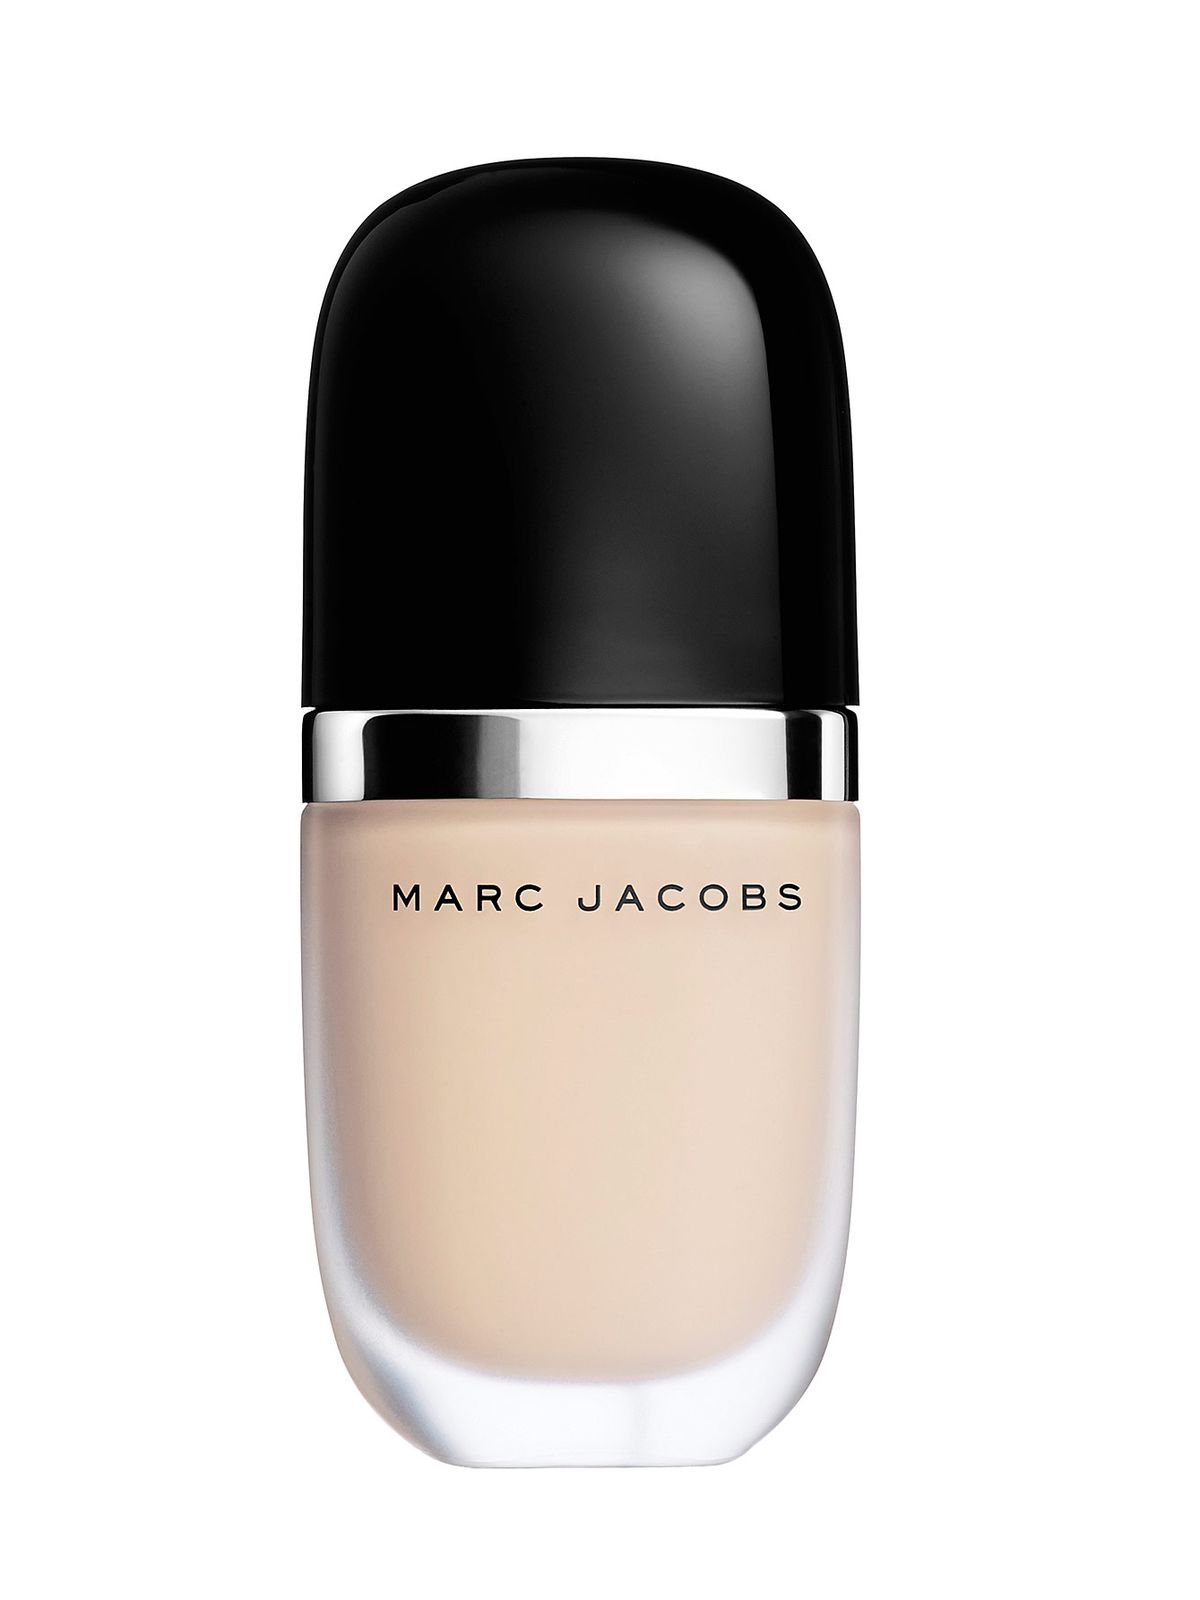 Marc Jacobs Beauty Genius Gel Super-Charged Oil-Free Foundation